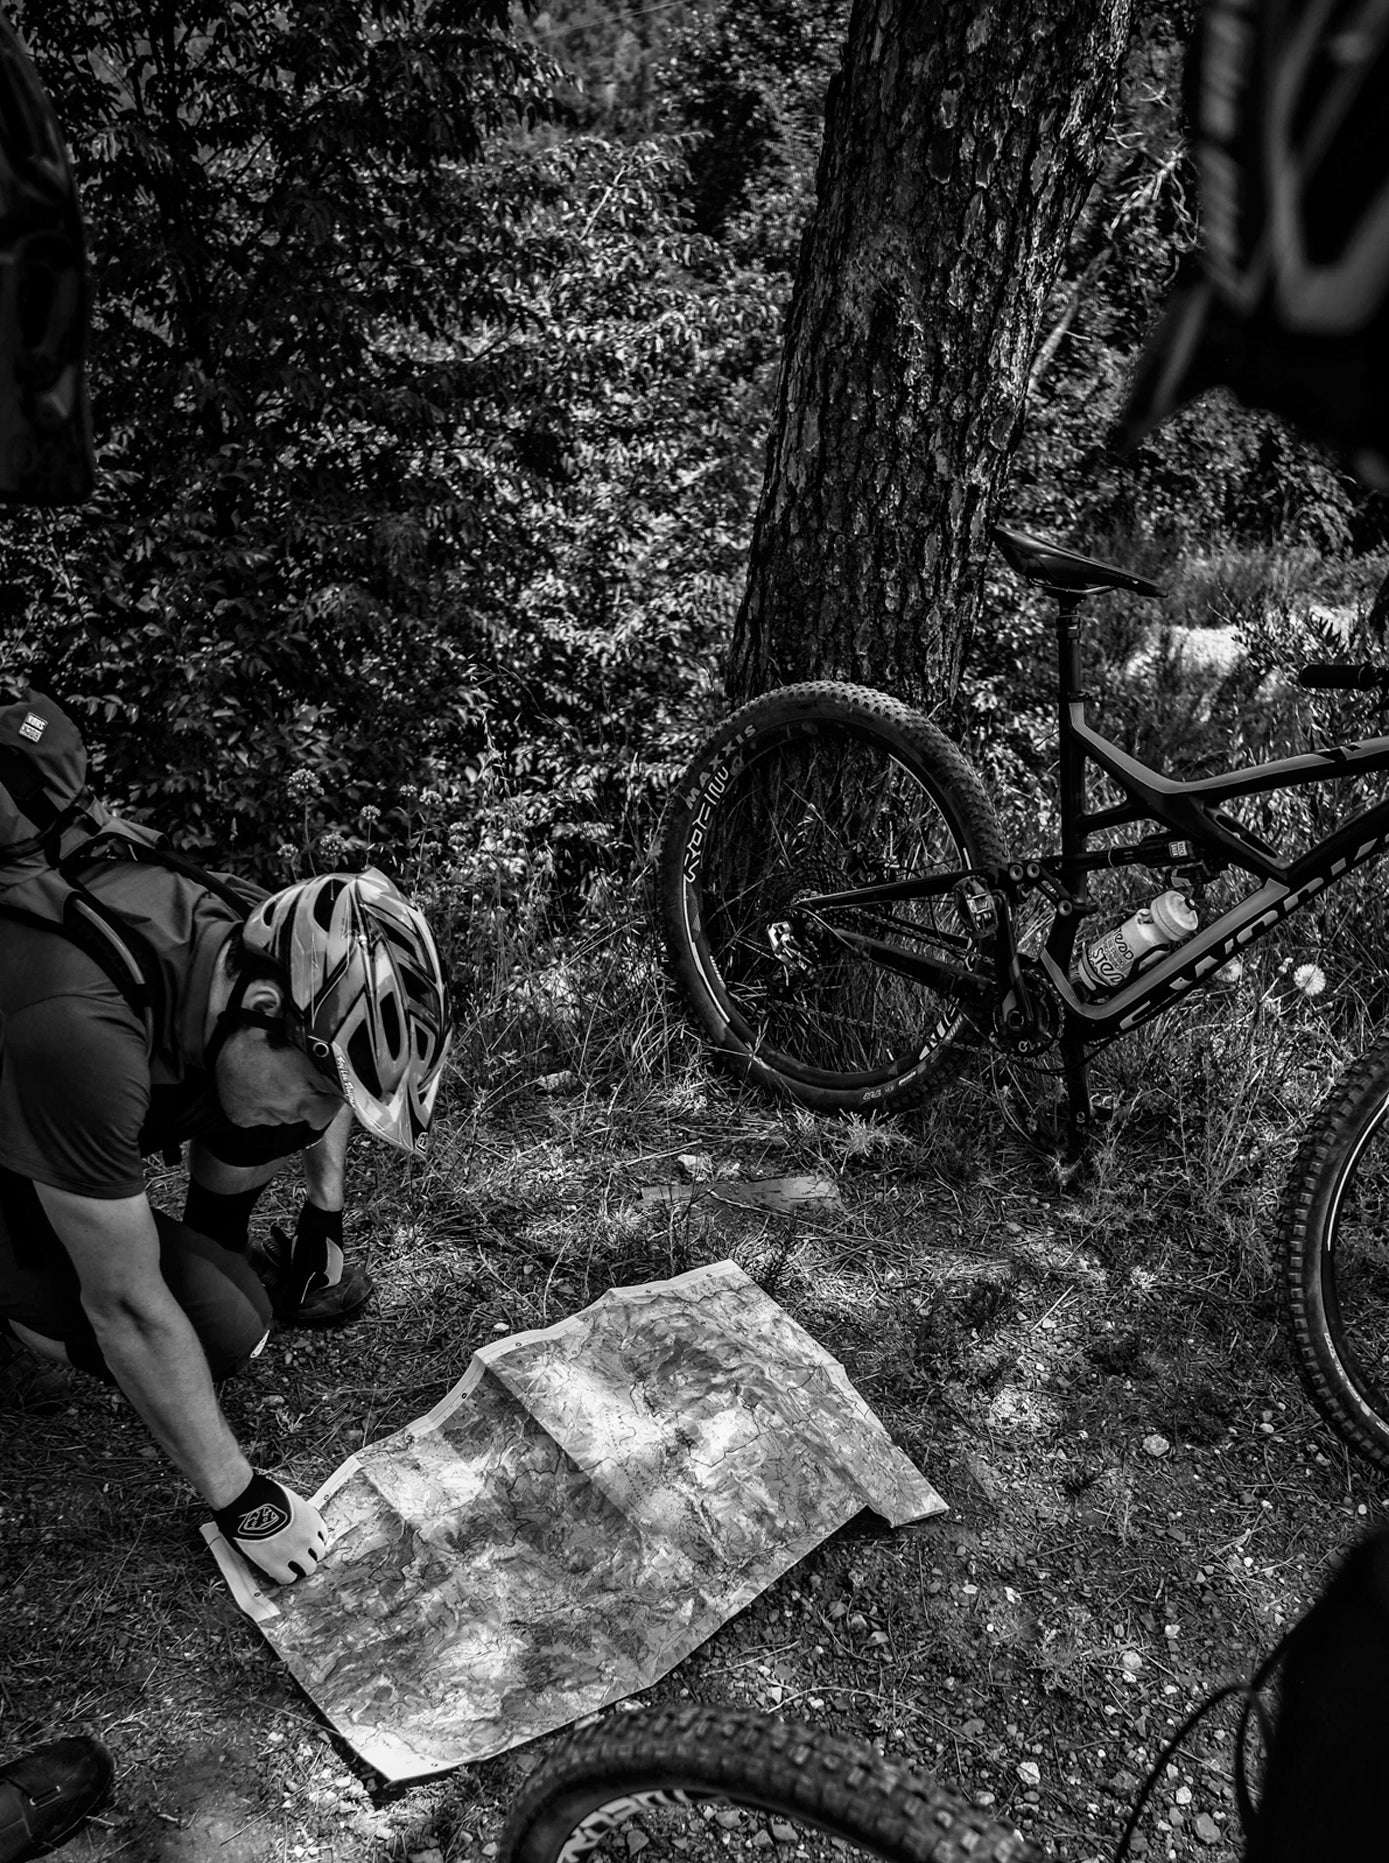 Mission Workshop Field Test : The Guide to Getting Lost - Summer 2014 - Mountain Bike Ride with SRAM, Golden Saddle Cyclery, Santa Cruz Bicycles, Sospel MTB, and John Prolly at The Radavist